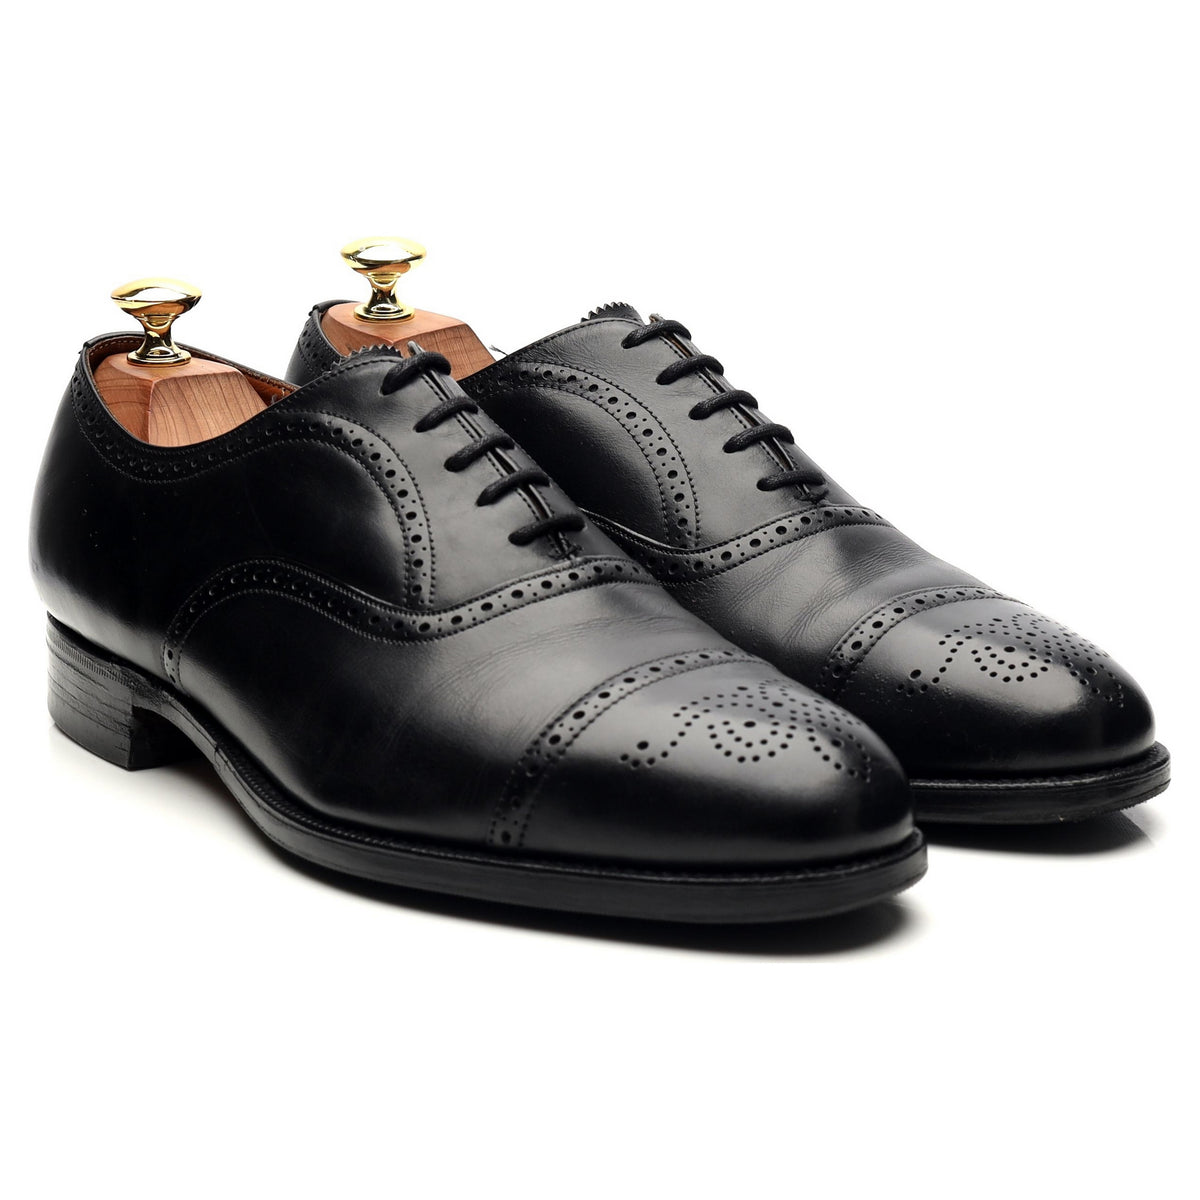 Black Leather Oxford Brogues UK 8 G